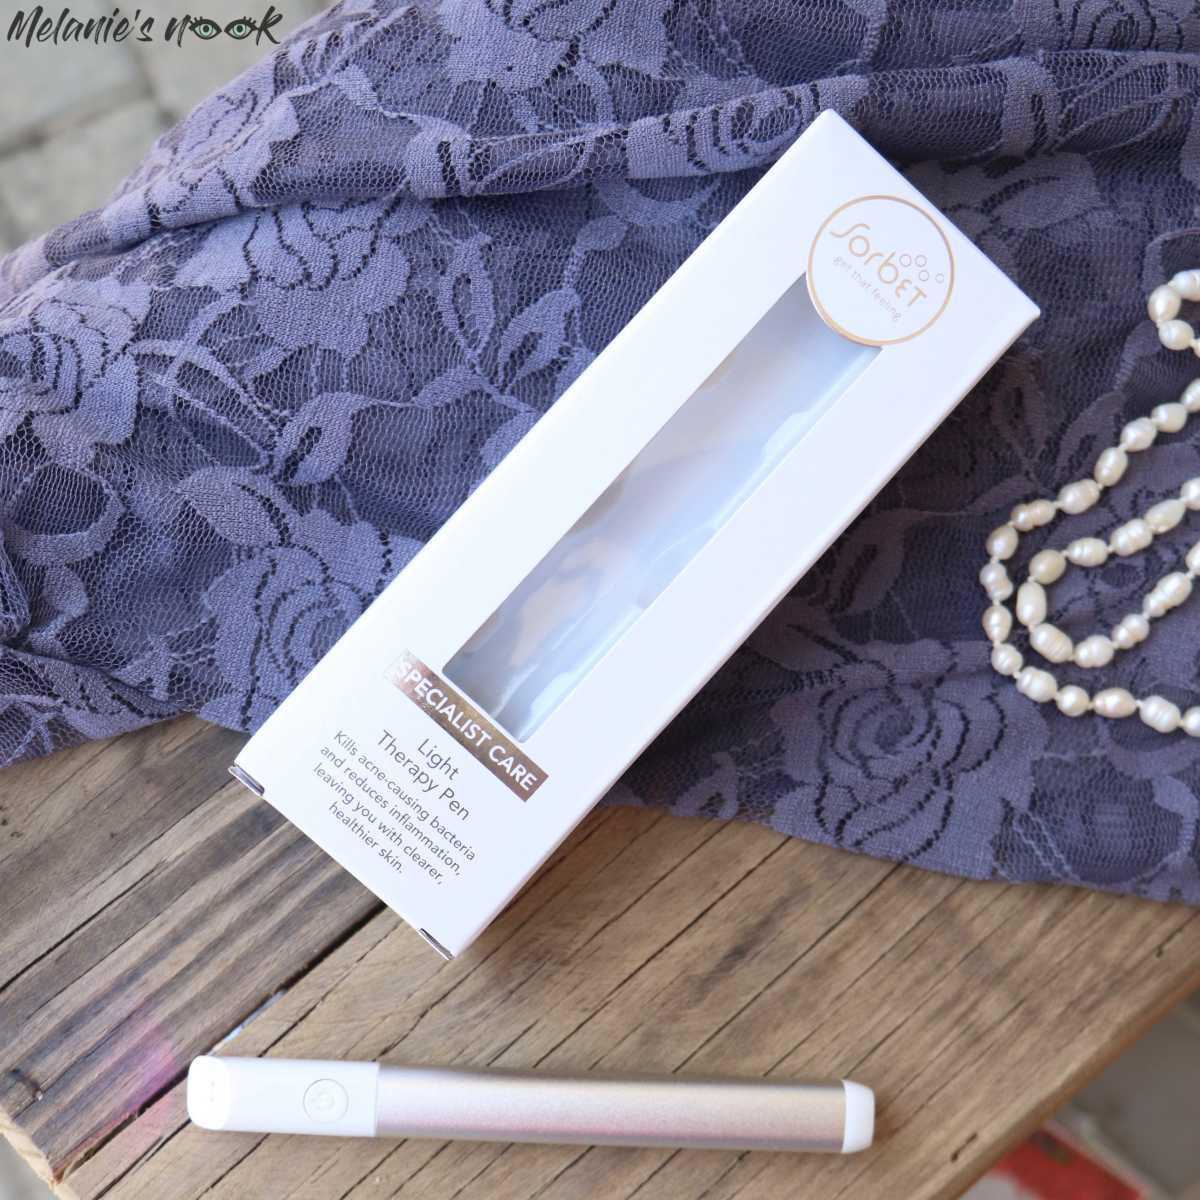 New in Beauty - Sorbet Light Therapy Pen